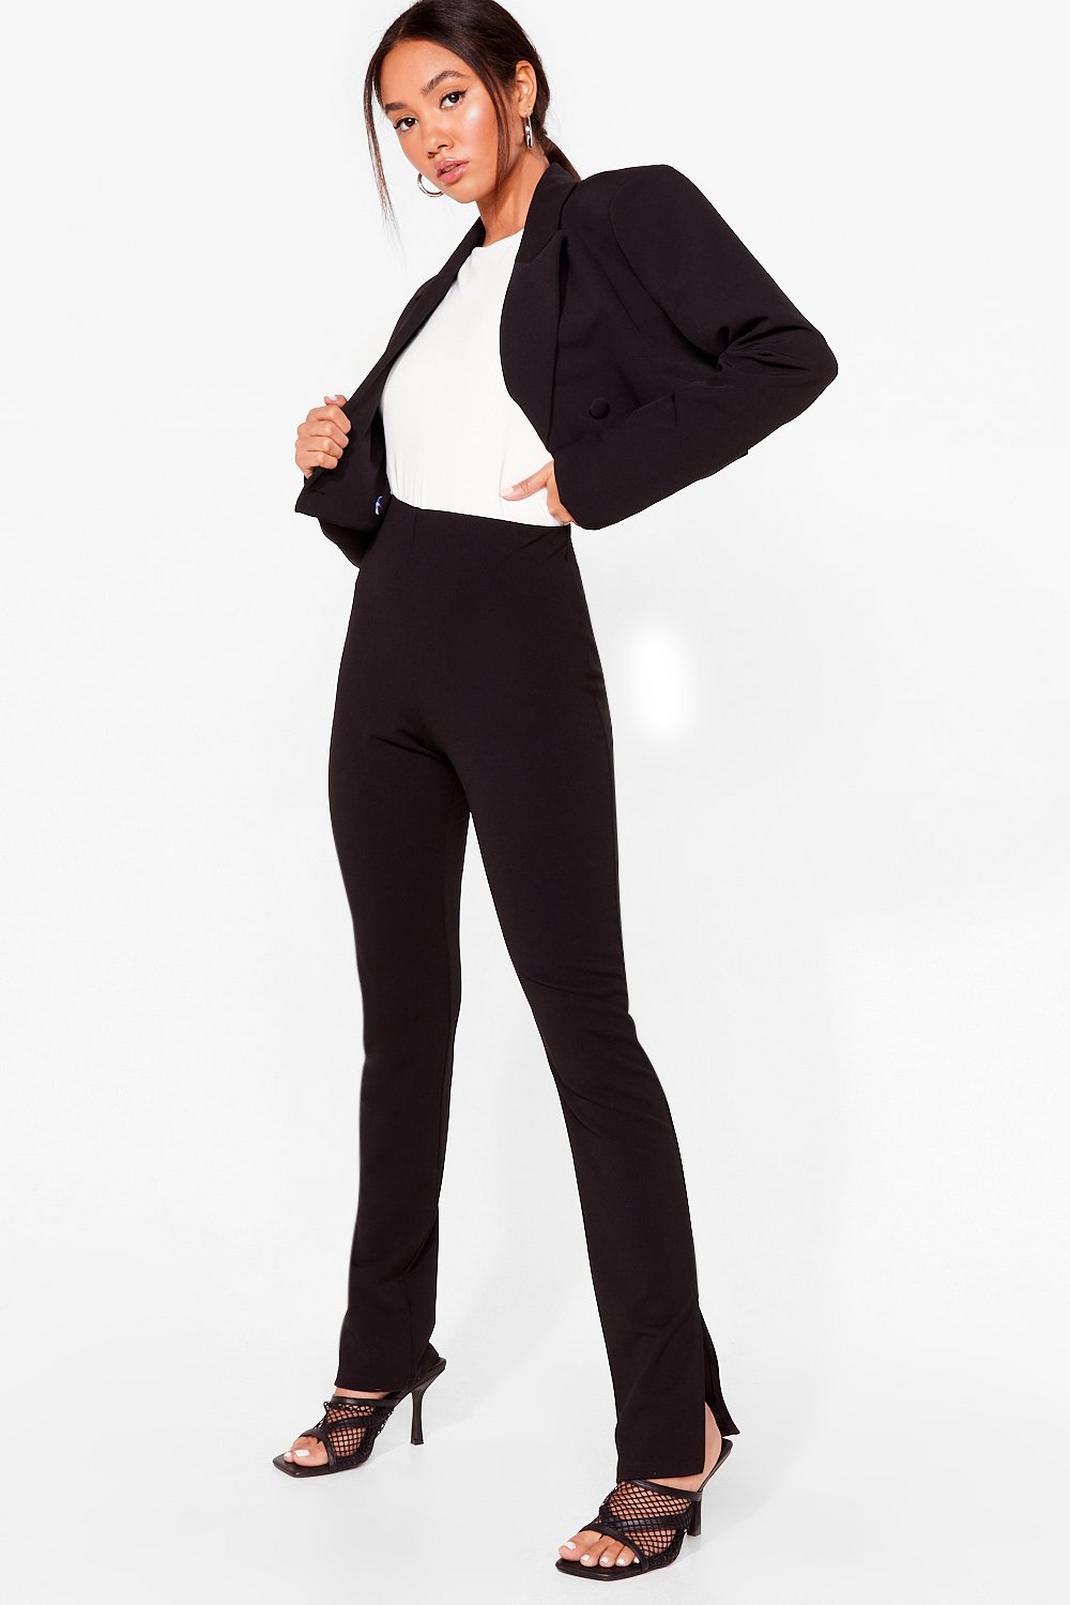 Slit's Your Call Petite High-Waisted Trousers image number 1